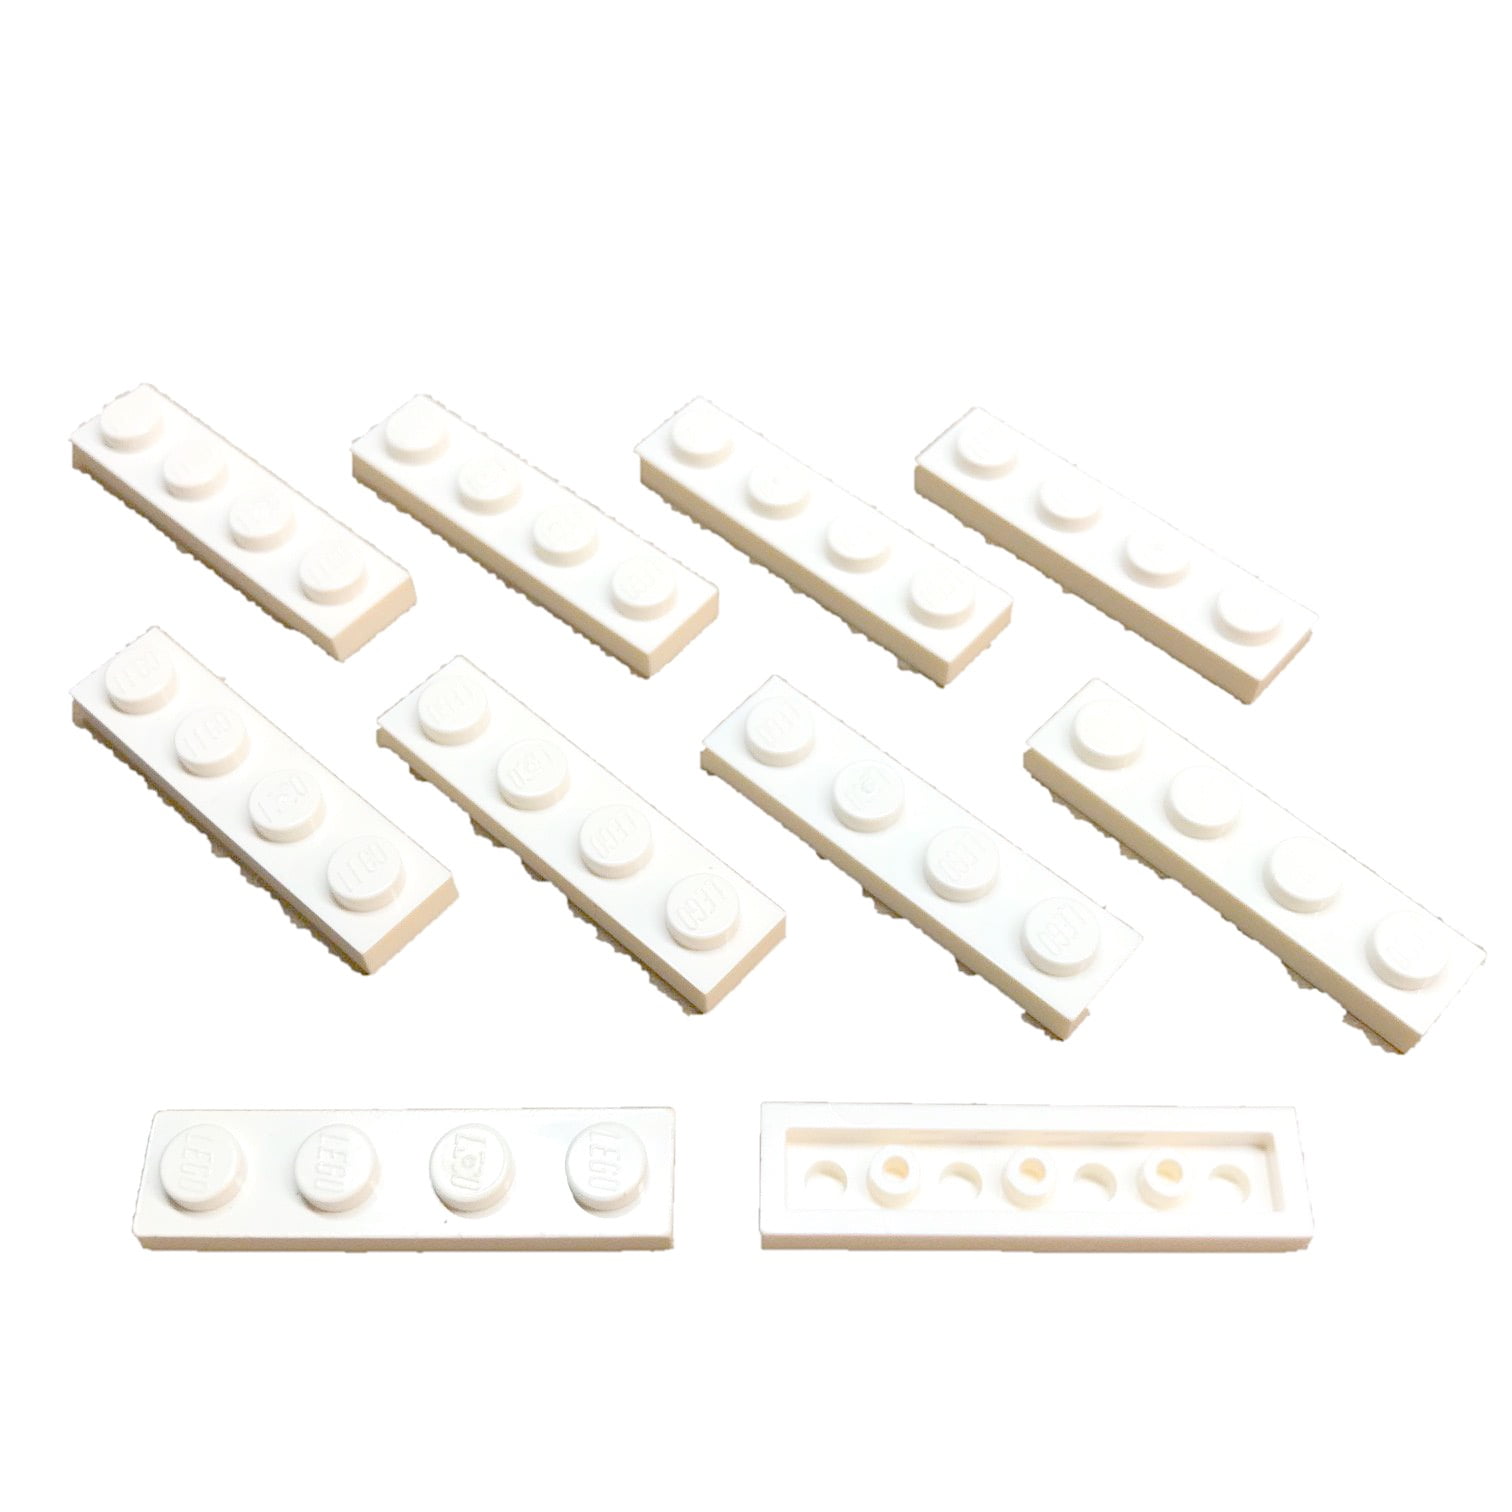 10 LEGO Parts~ 1x4 Plate 3710 WHITE 3710